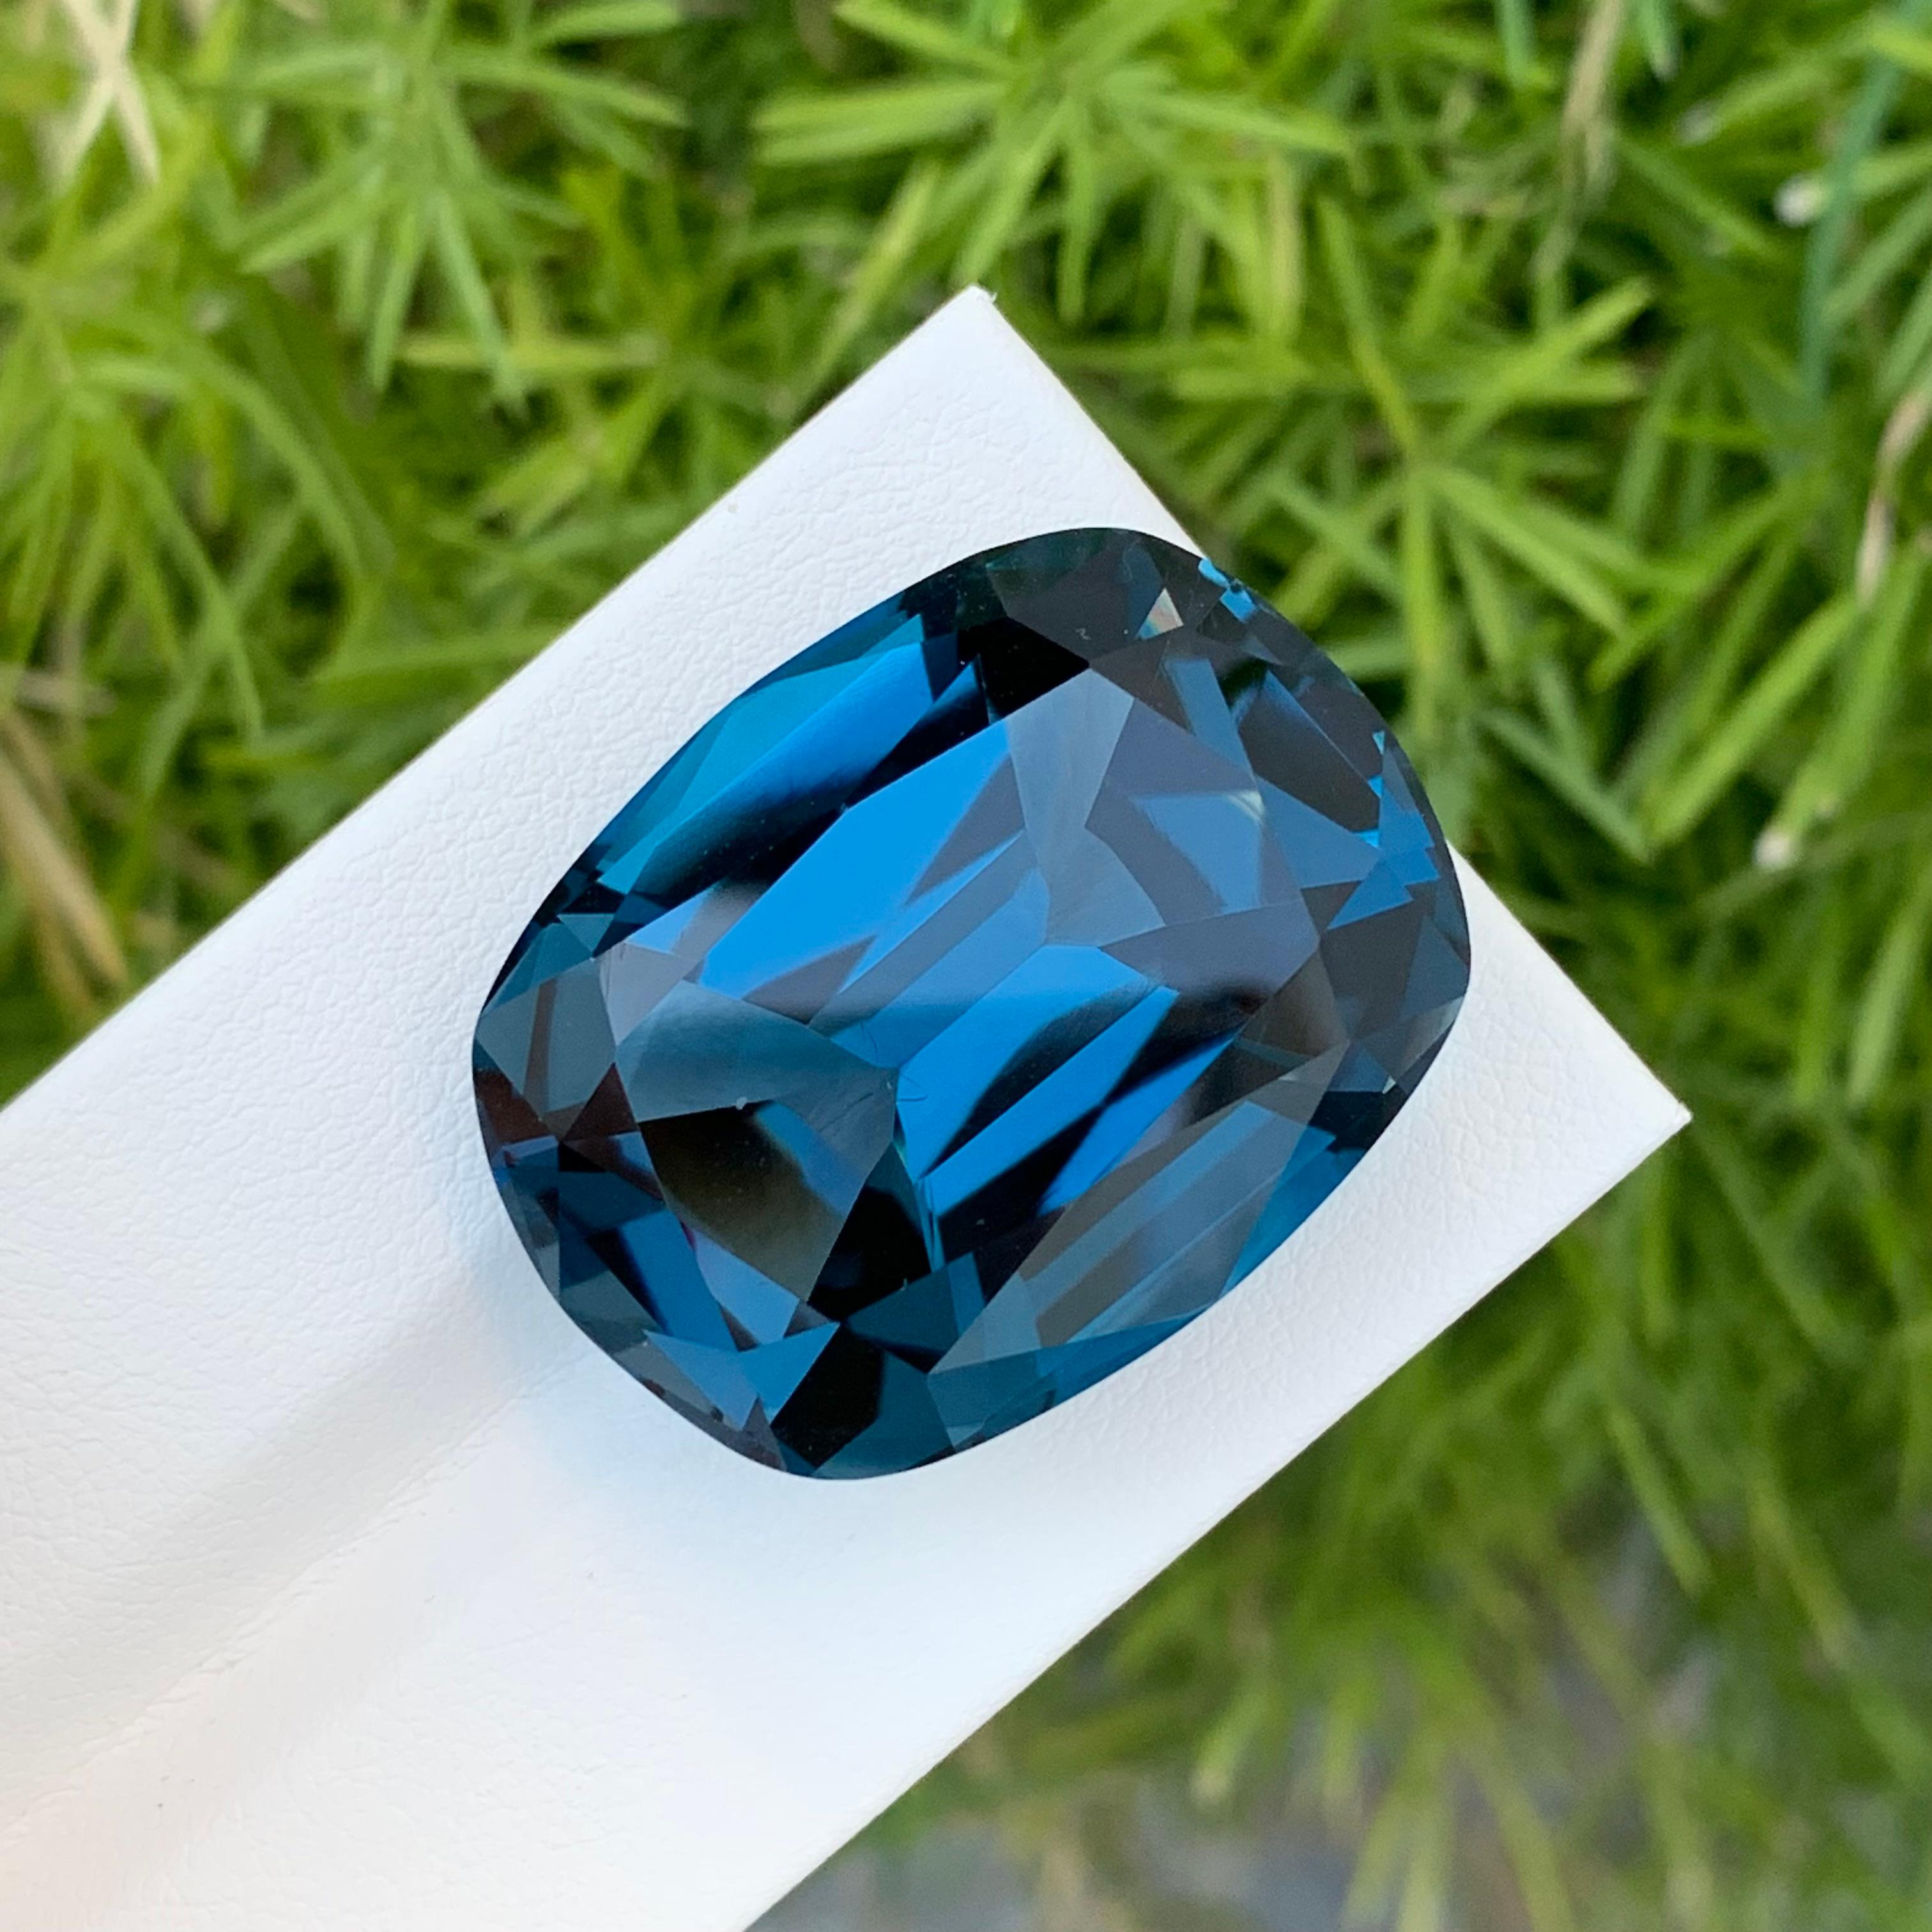 Loose London Blue Topaz

Weight: 77.15 Carats
Dimension: 29 x 22 x 14.9 Mm
Origin: Brazil
Shape: long Cushion 
Color: Deep Blue
Certificate: On Customer Demand

London Blue Topaz is a mesmerizing variety of topaz renowned for its deep and enchanting